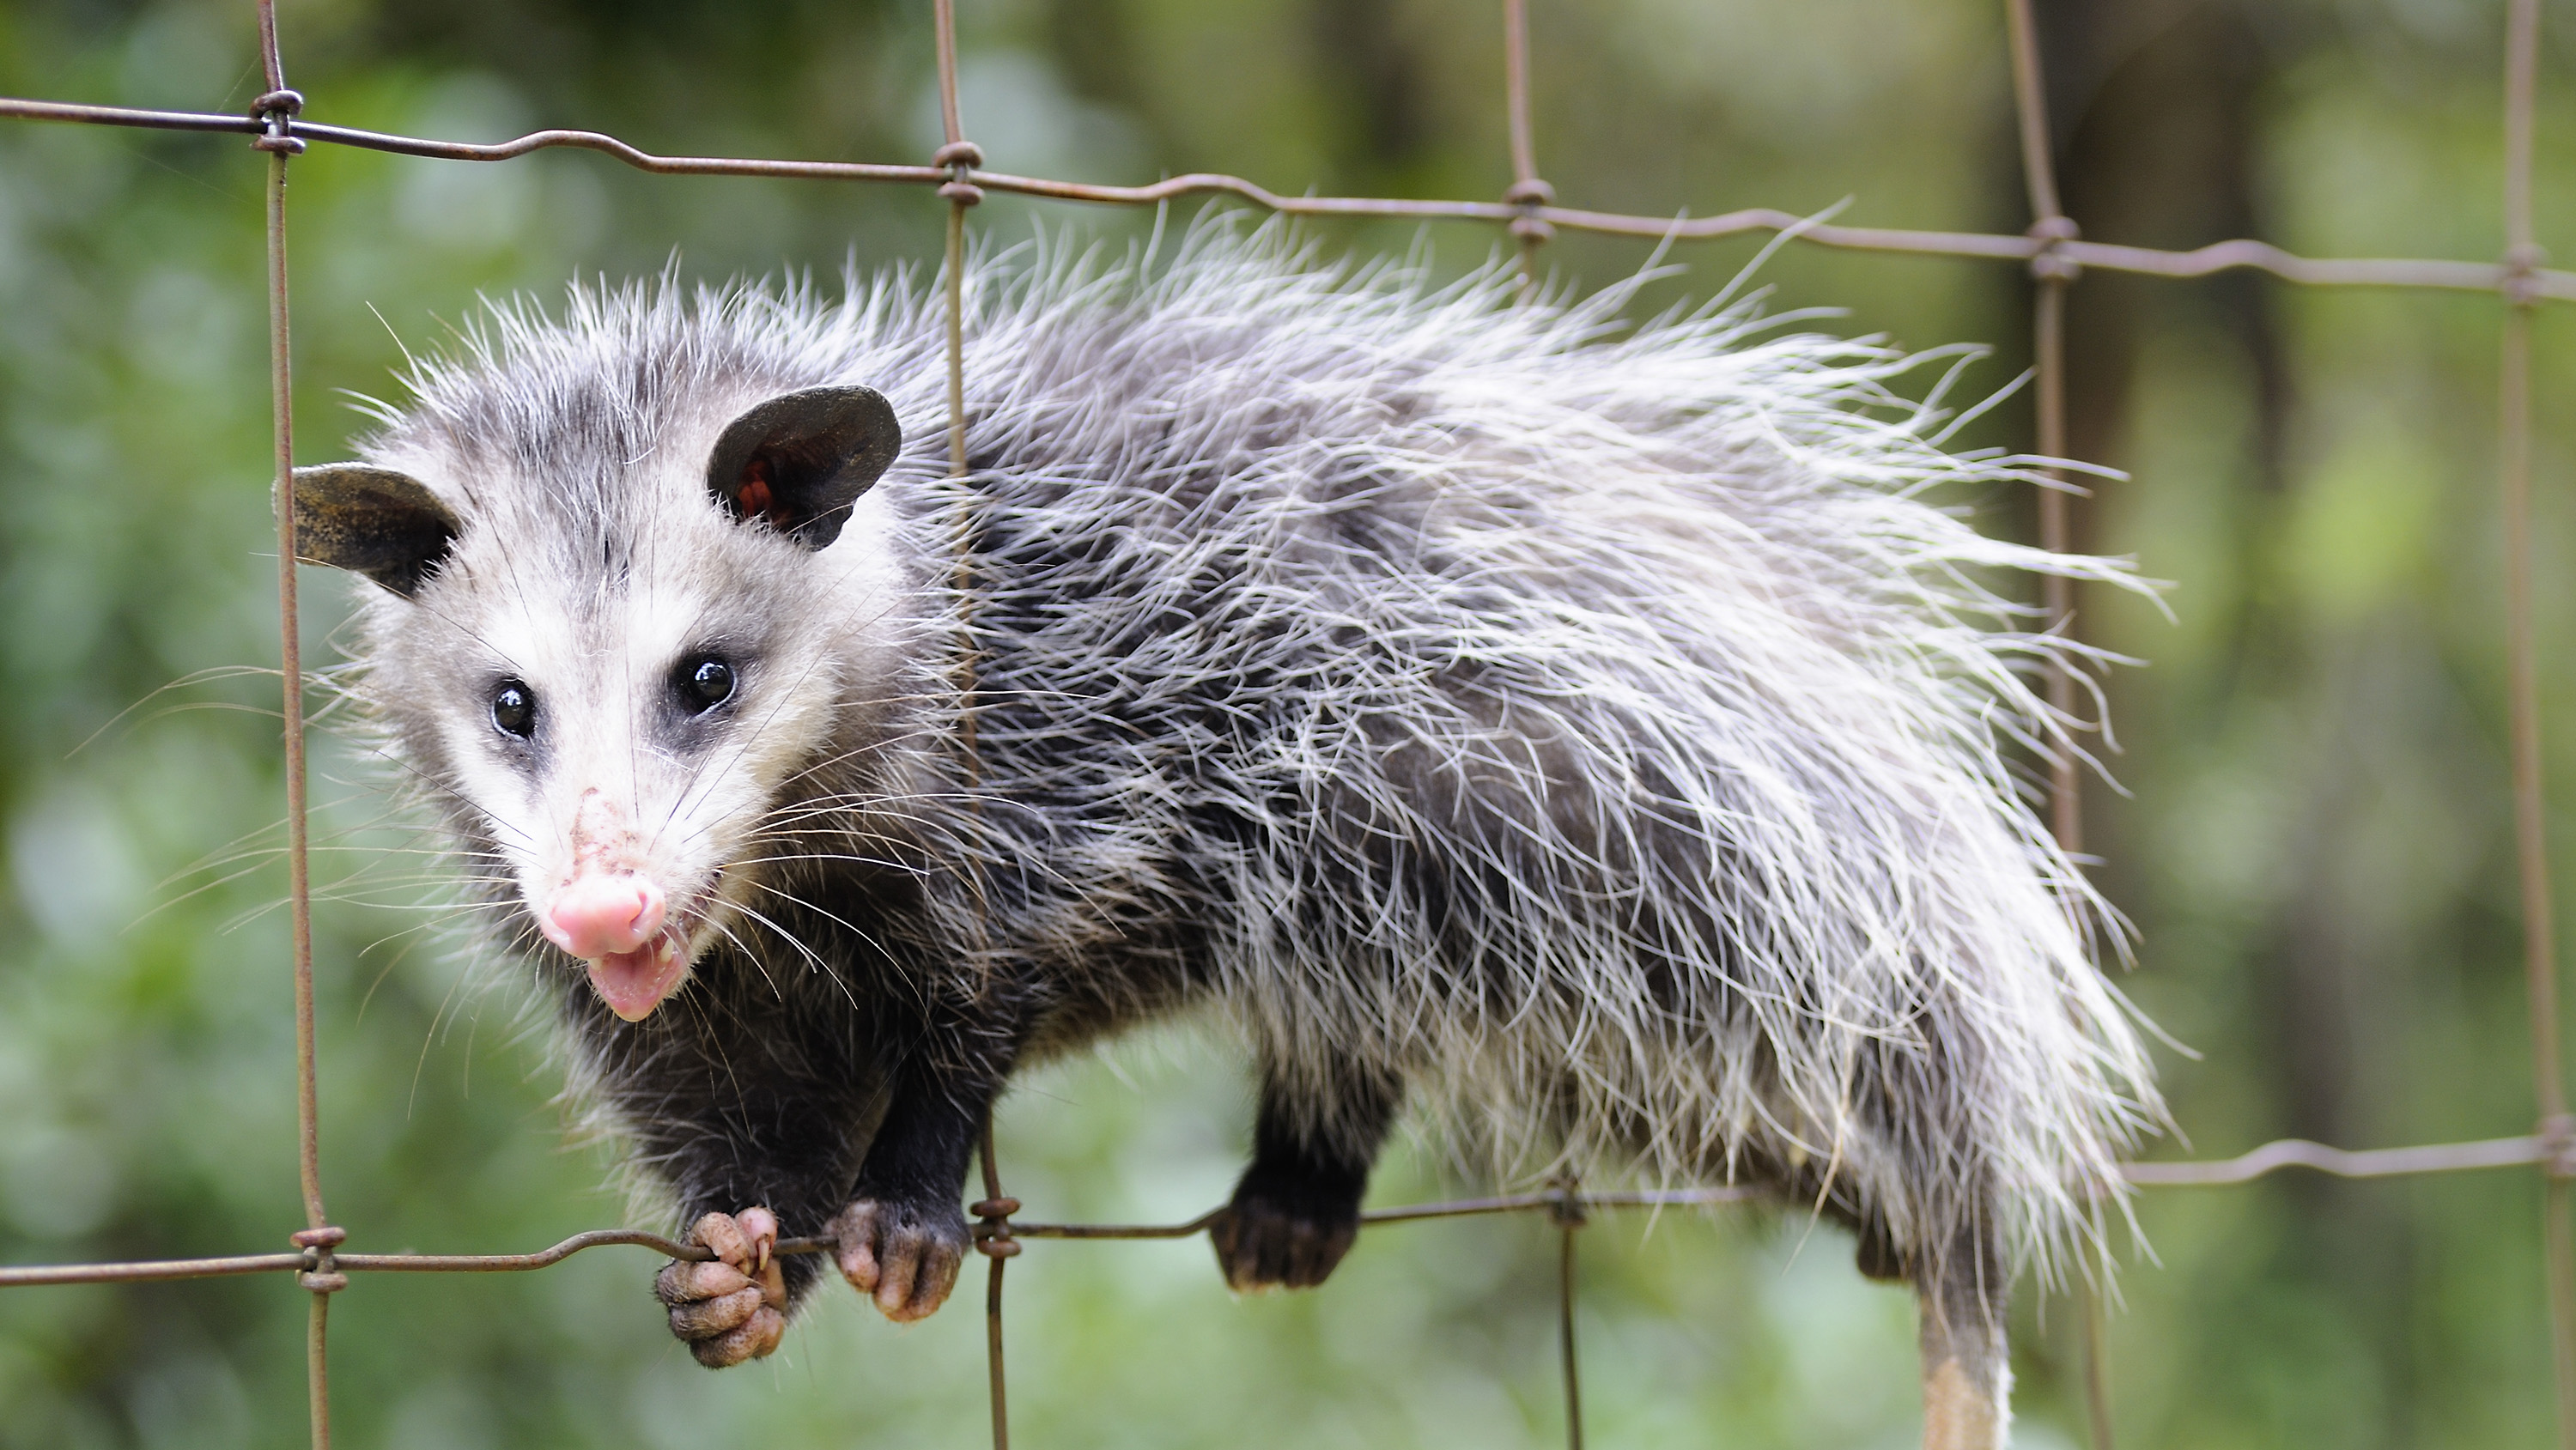 An opossum on a wire fence.